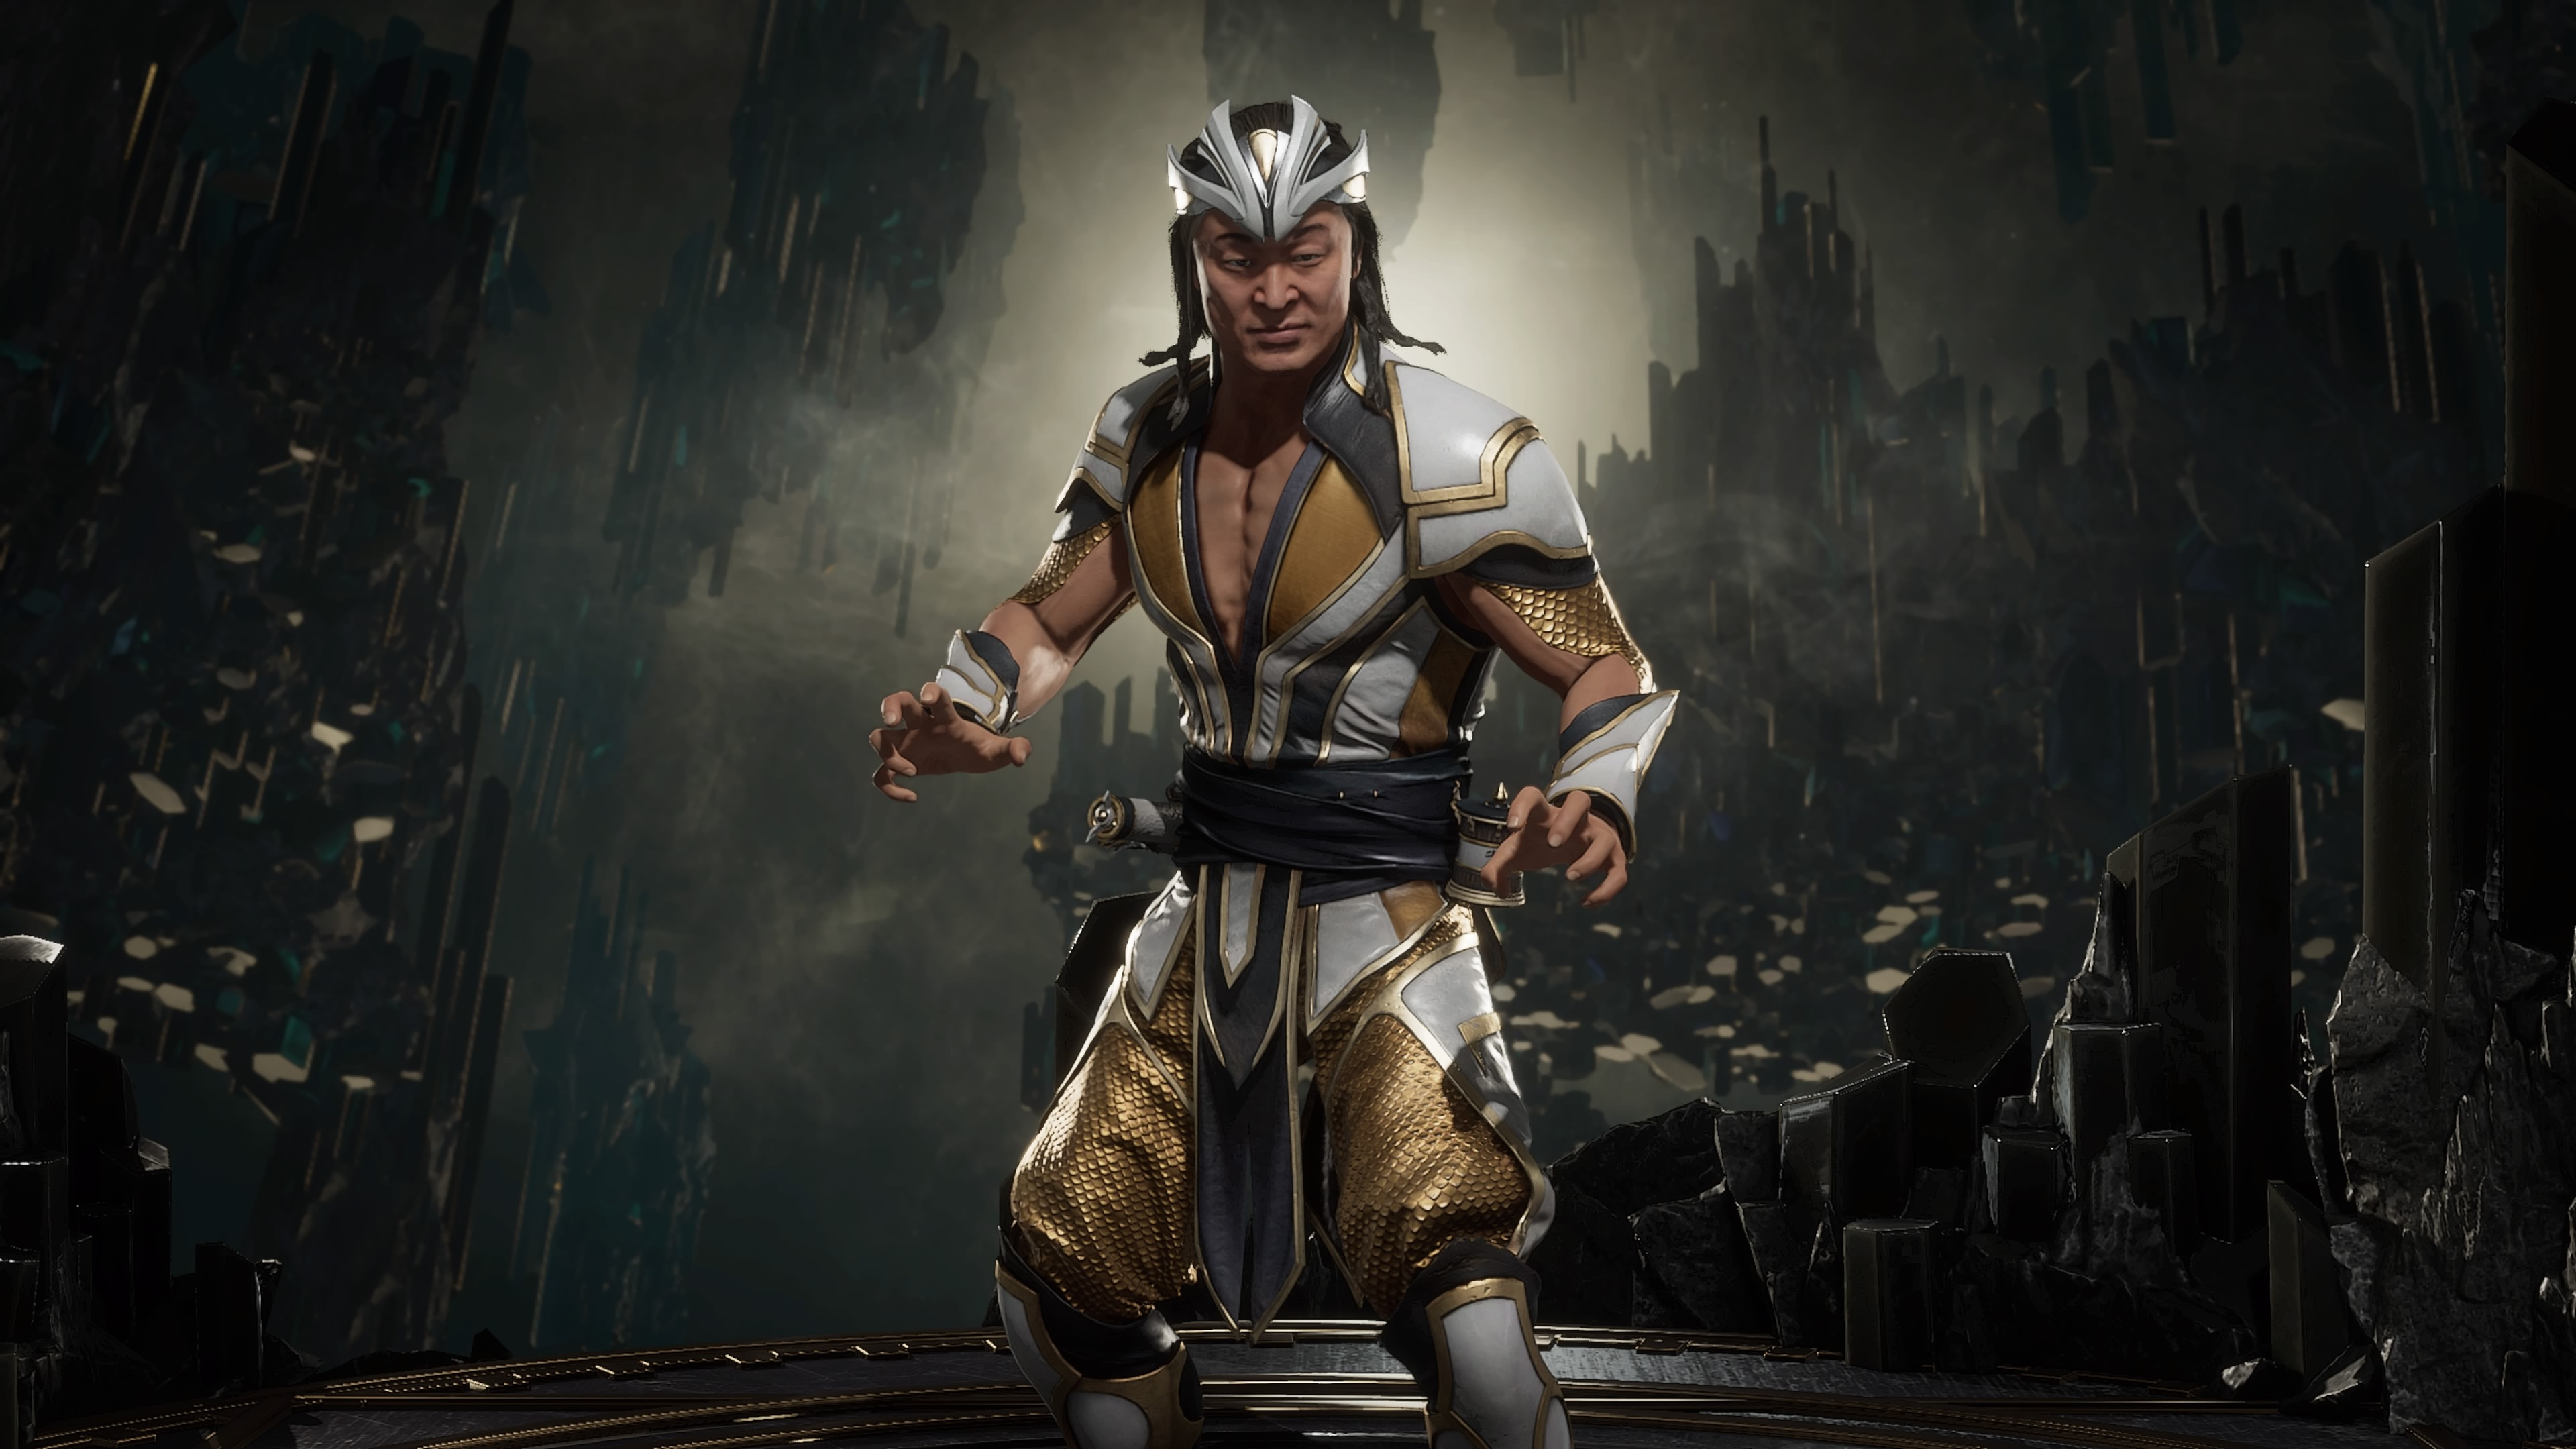 Shang Tsung Turns To Dust Death Scene - MORTAL KOMBAT 11 AFTERMATH 